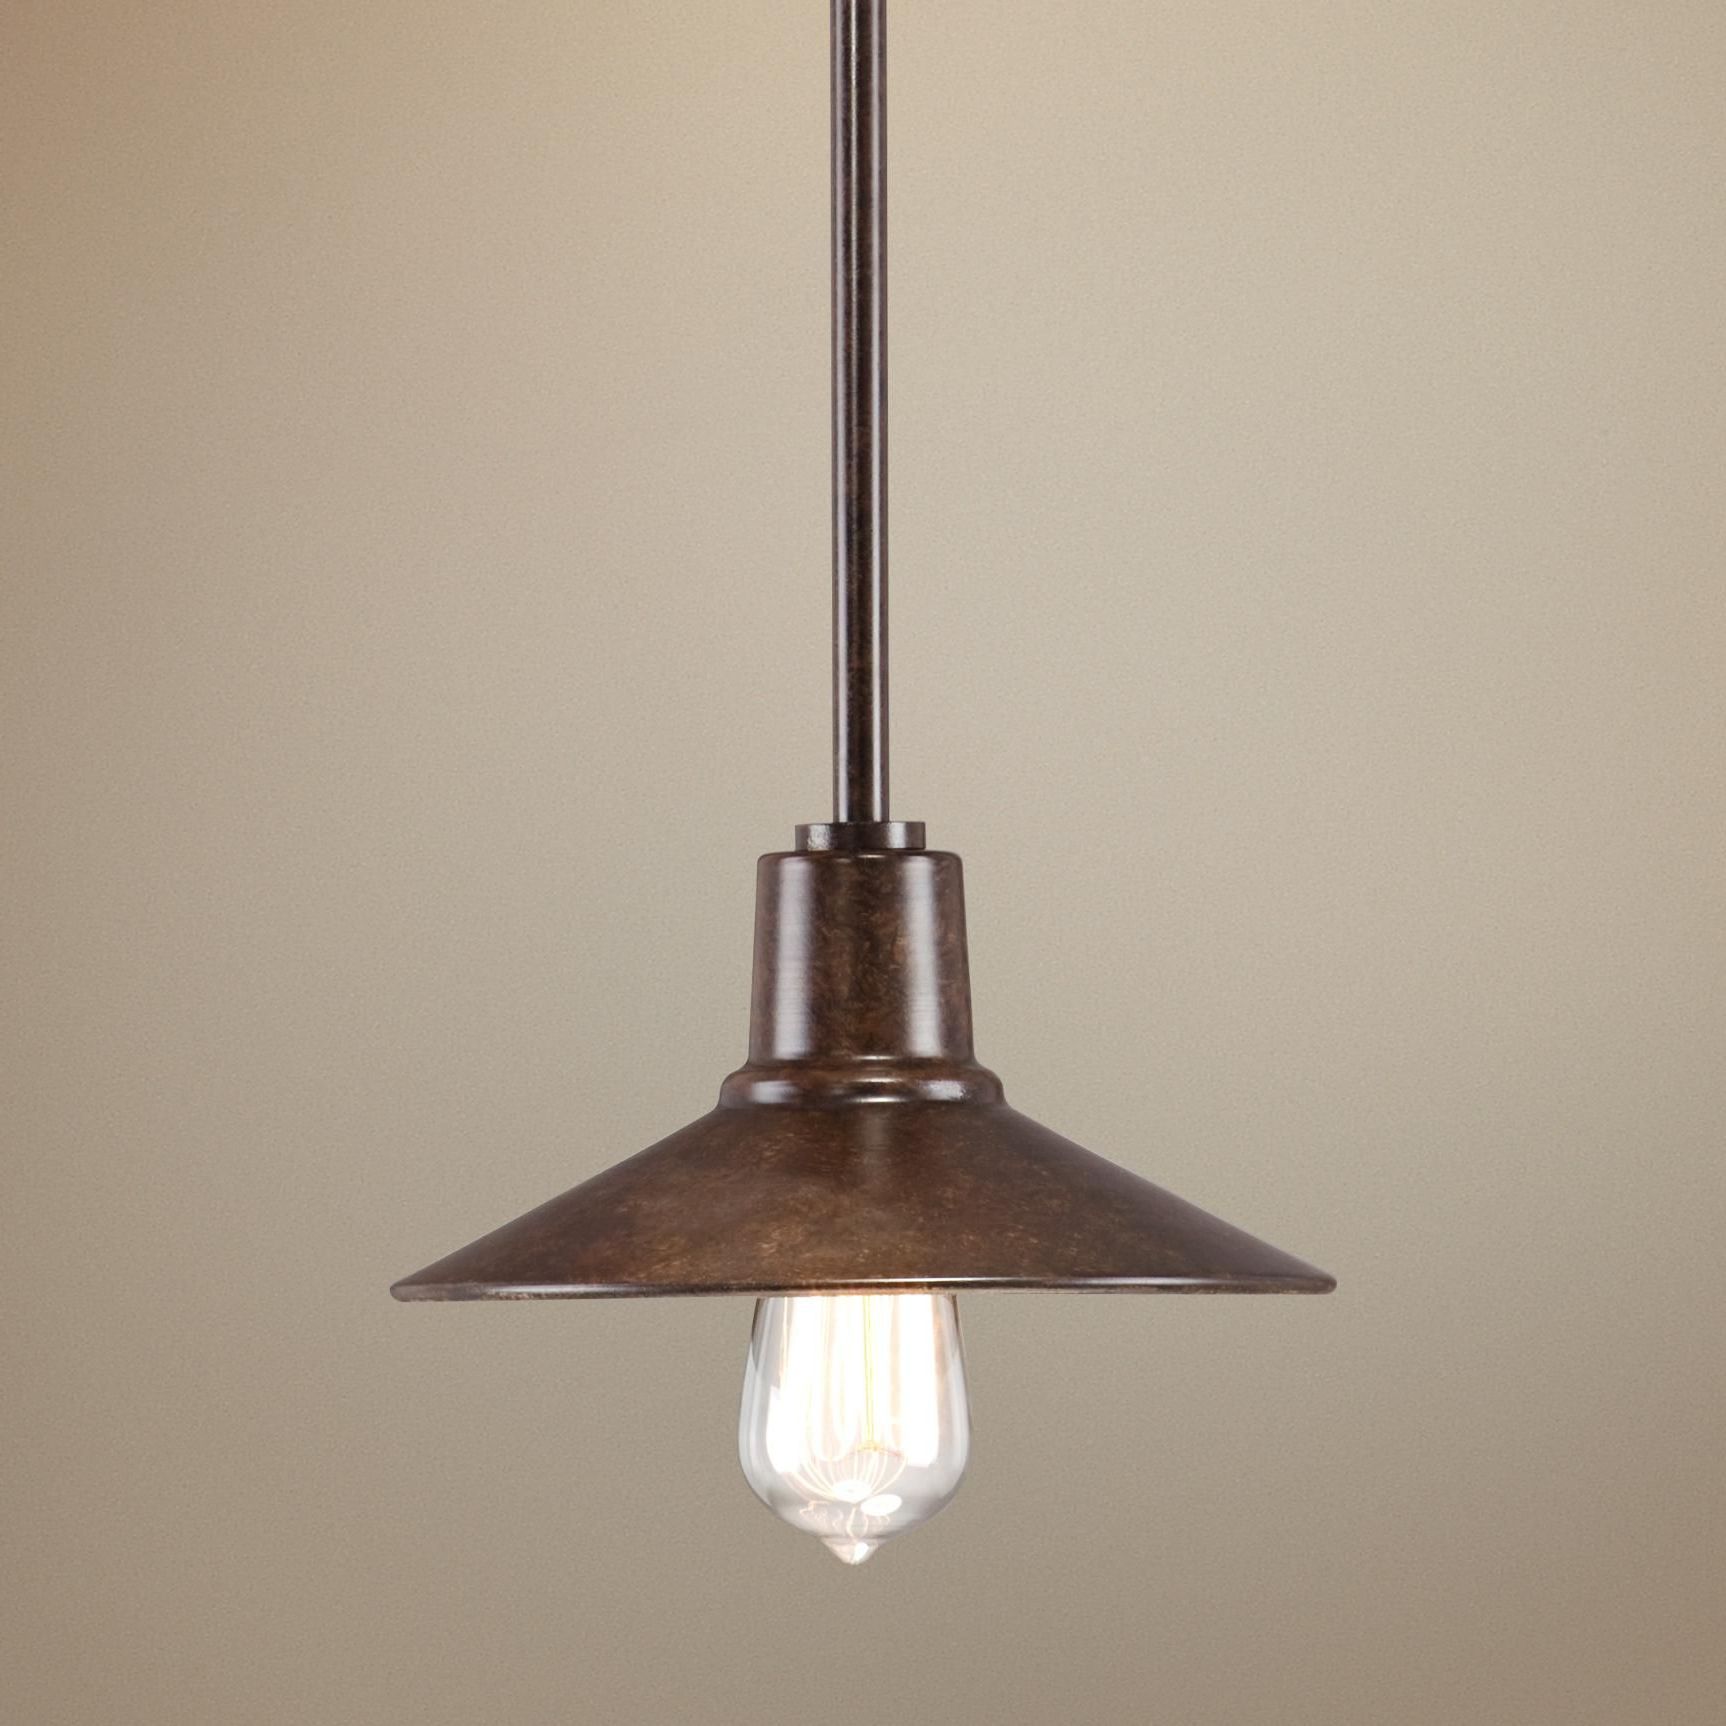 Warm Bronze 9" Wide Edison Industrial Mini Pendant Light With Regard To Well Known Warm Antique Brass Pendant Lights (View 15 of 20)